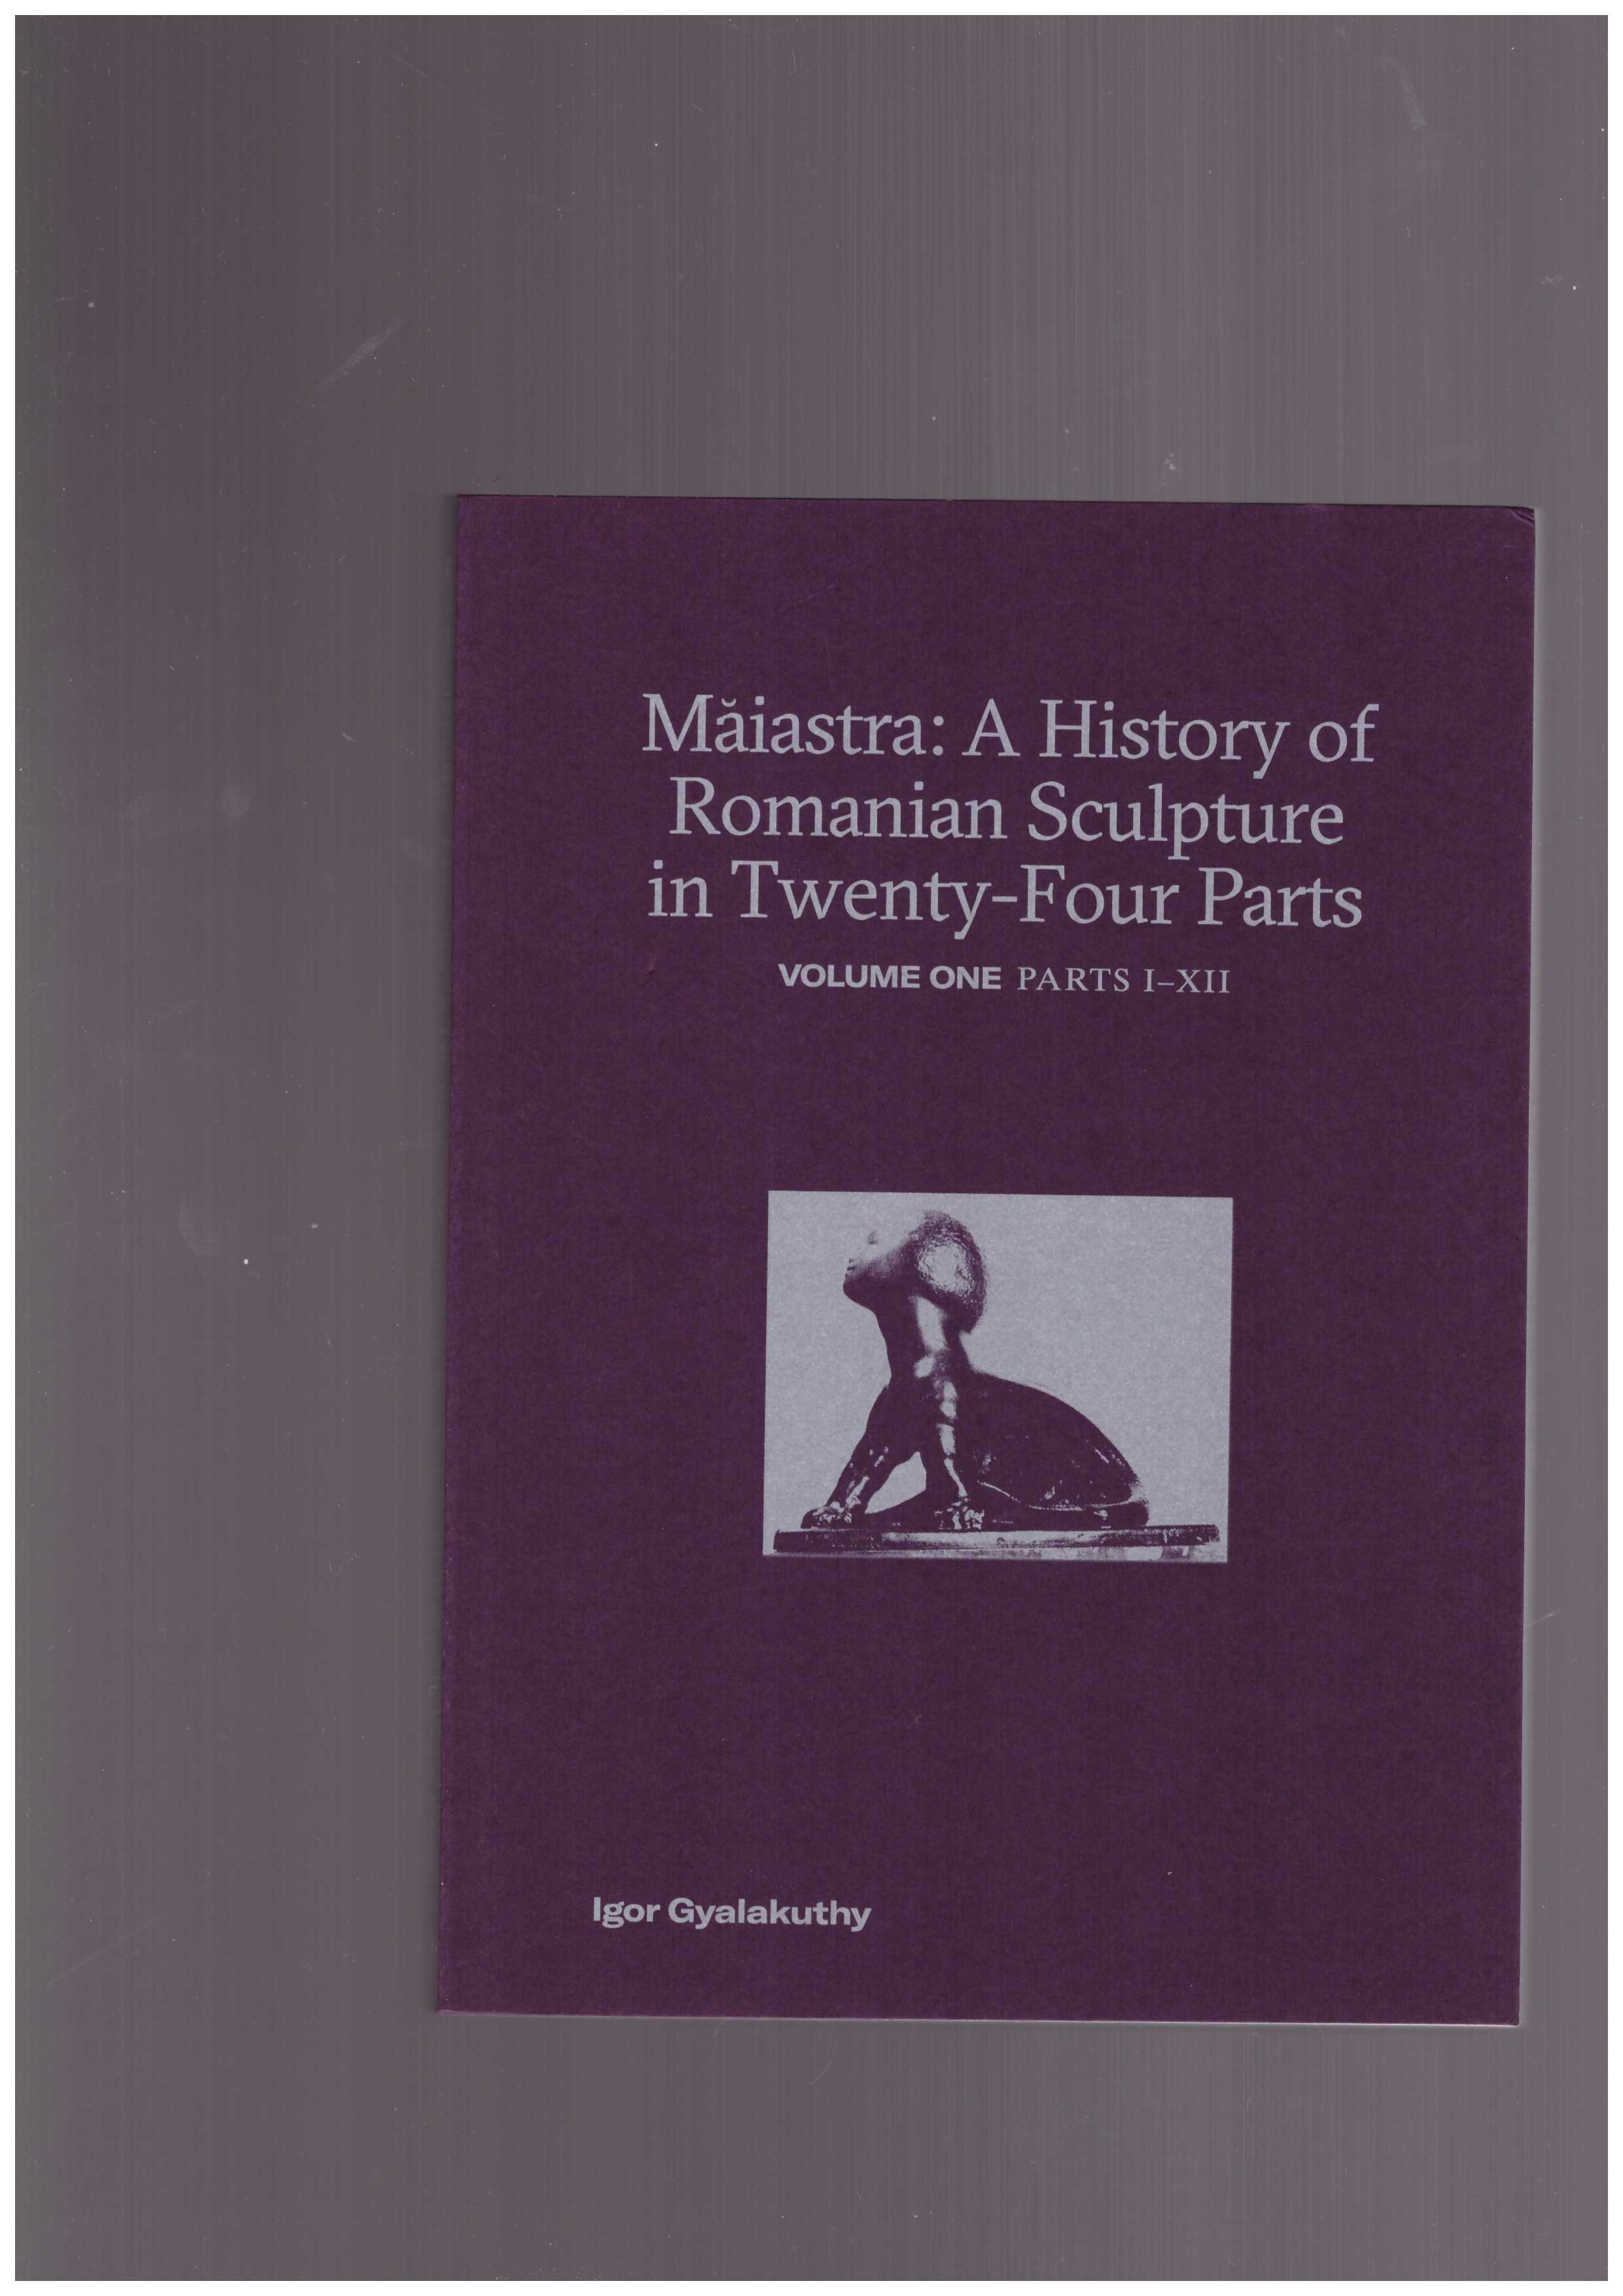 GYALAKUTHY, Igor Gyalakuthy ; STANLEY, Timothy  - Maiastra: A History of Romanian Sculpture in Twenty-Four Parts